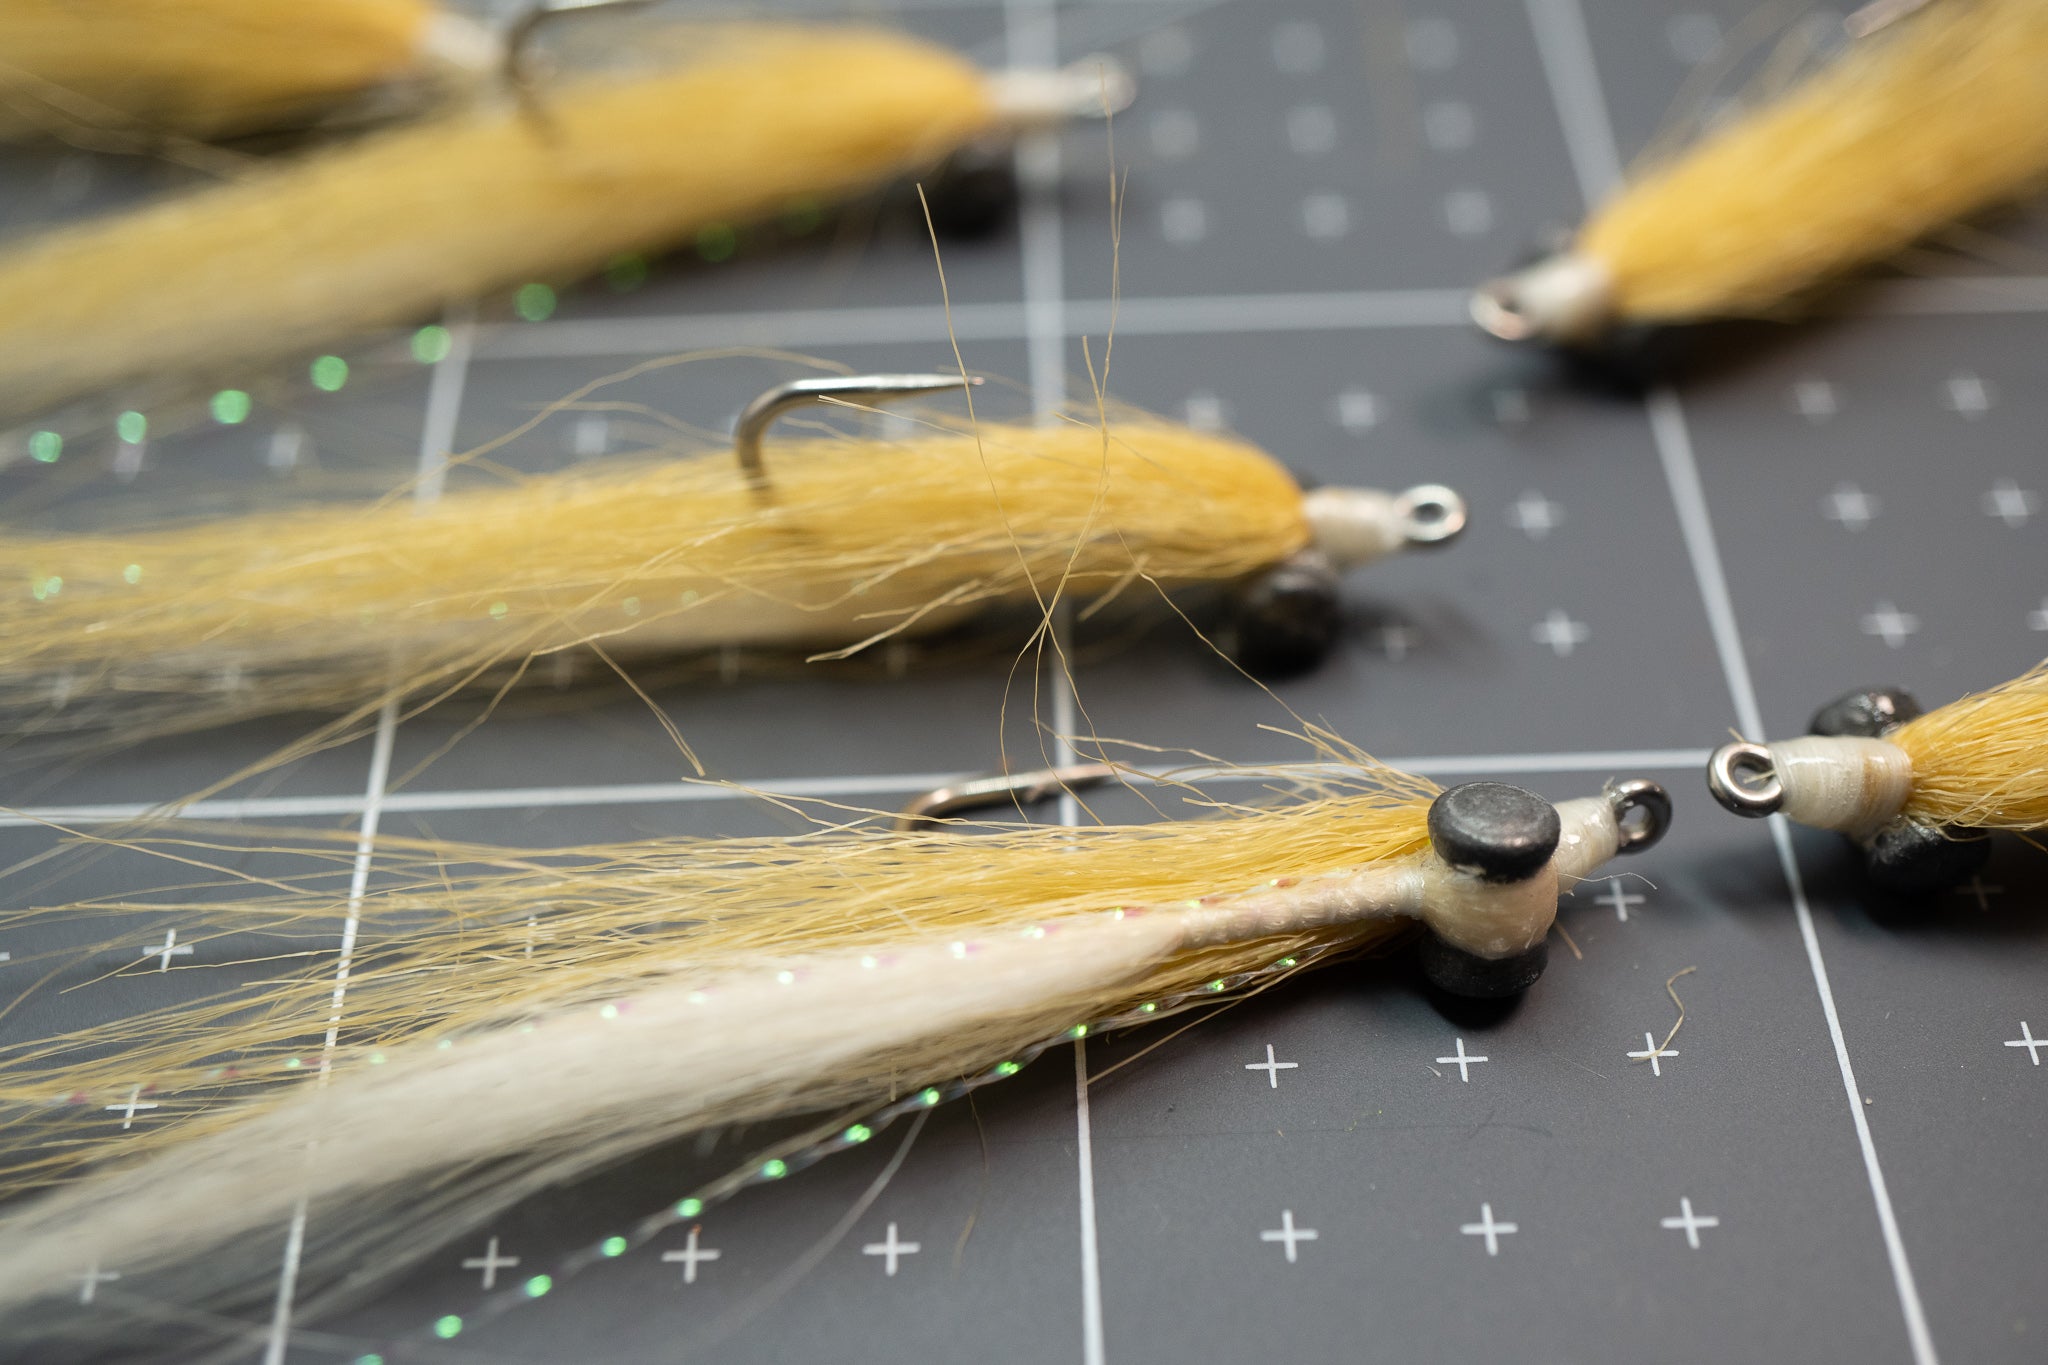 Streamer Flies for Fly Fishing, Classic Clouser Minnow Fishing